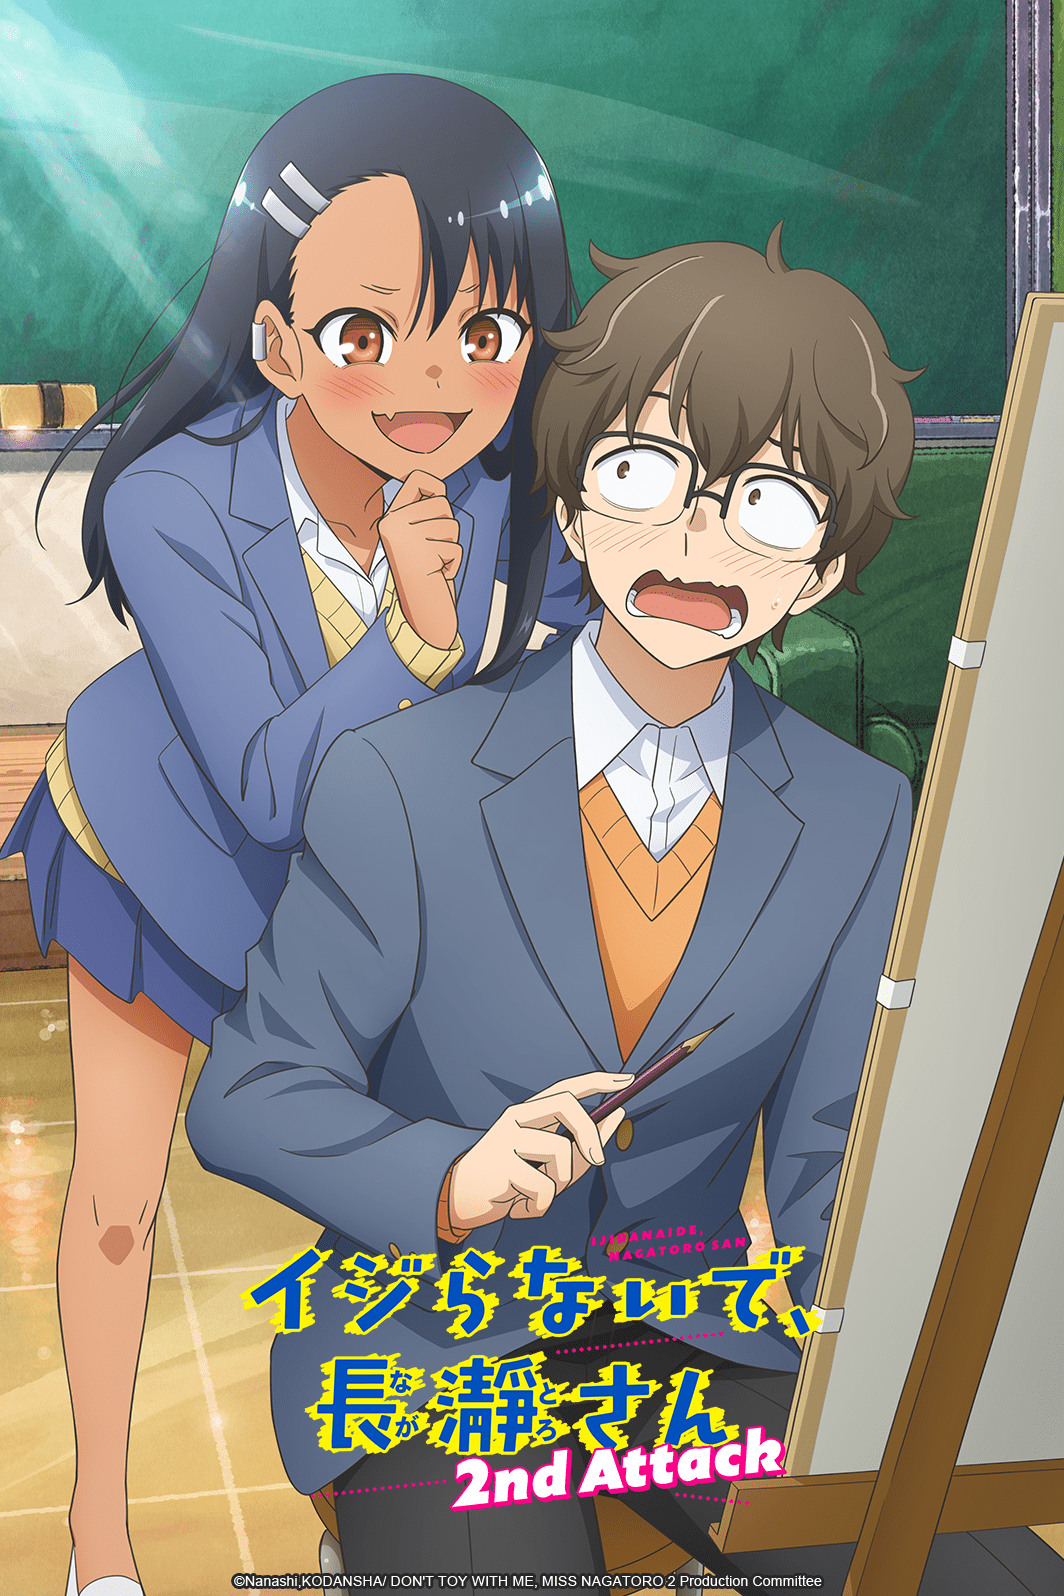 Crunchyroll.pt - Tática: 0-0-11 ofensiva 👀 (✨ Anime: DON'T TOY WITH ME,  MISS NAGATORO 2nd Attack)